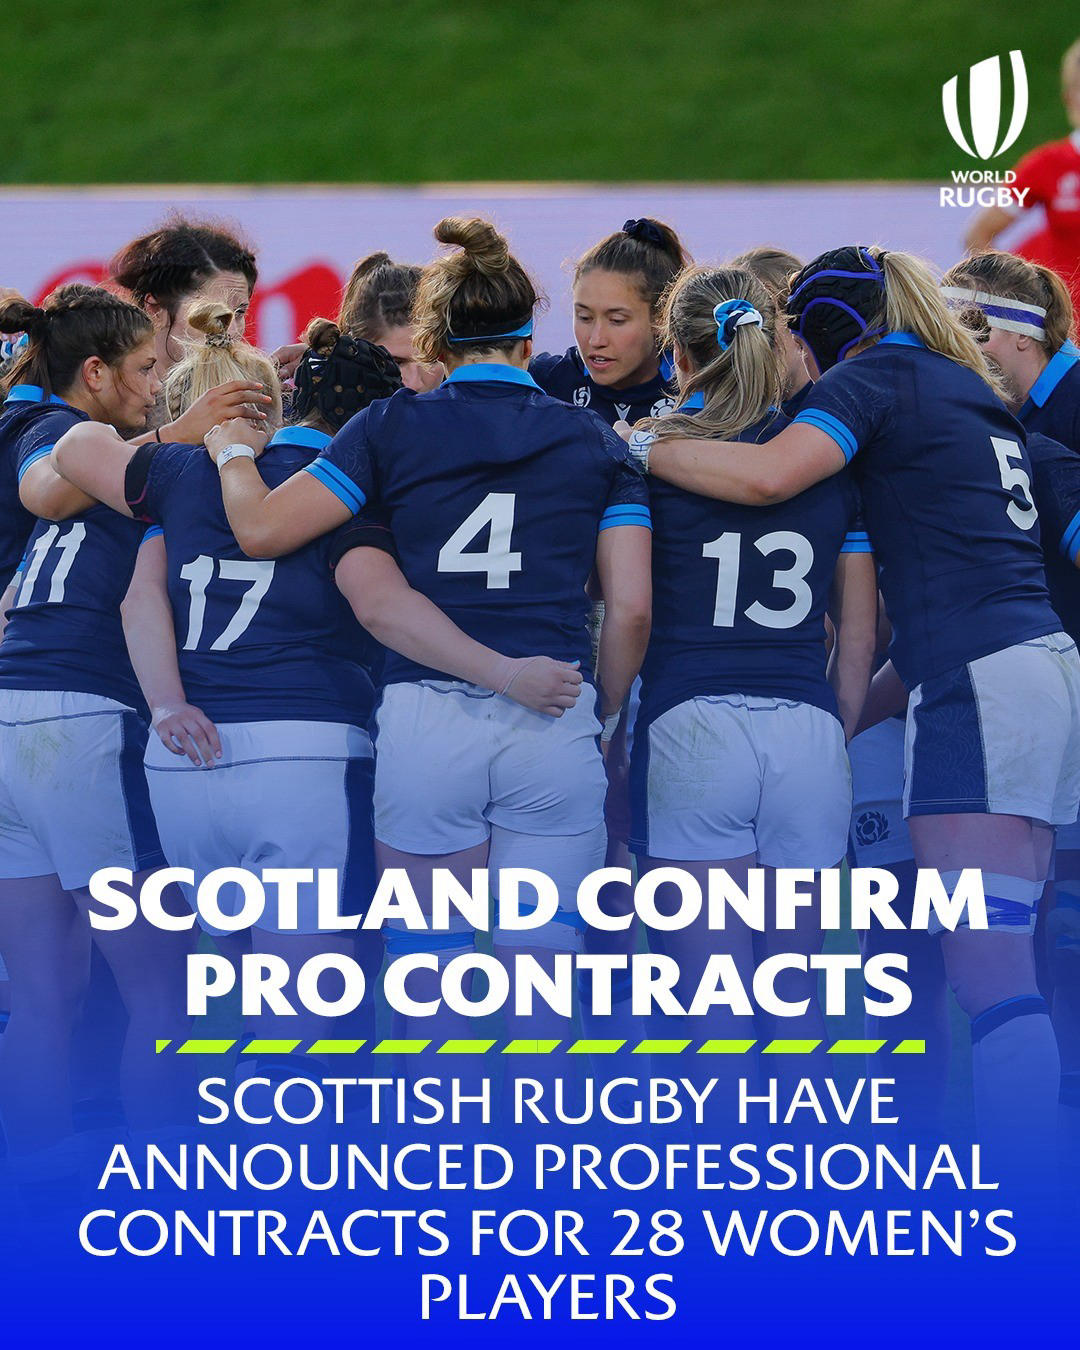 World Rugby - Big things to come for women's rugby in Scotland